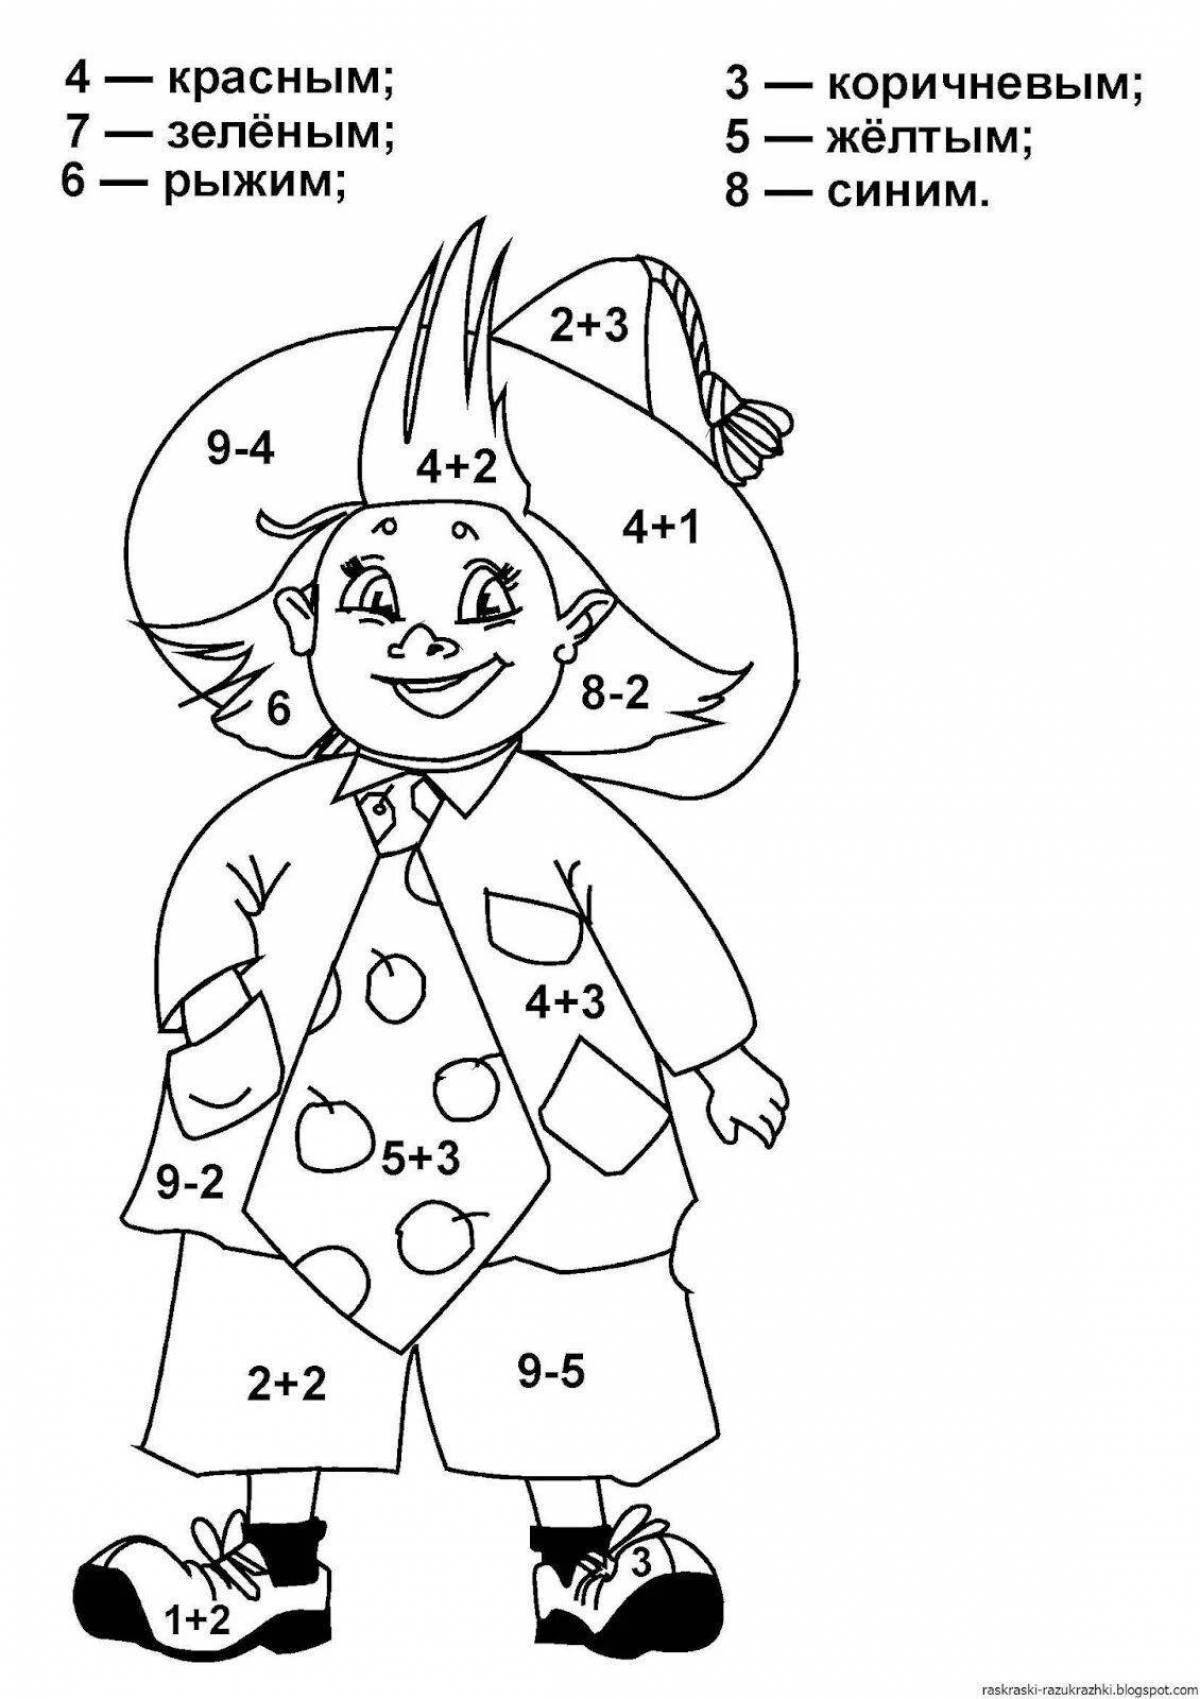 A fun math coloring book for 3-4 year olds